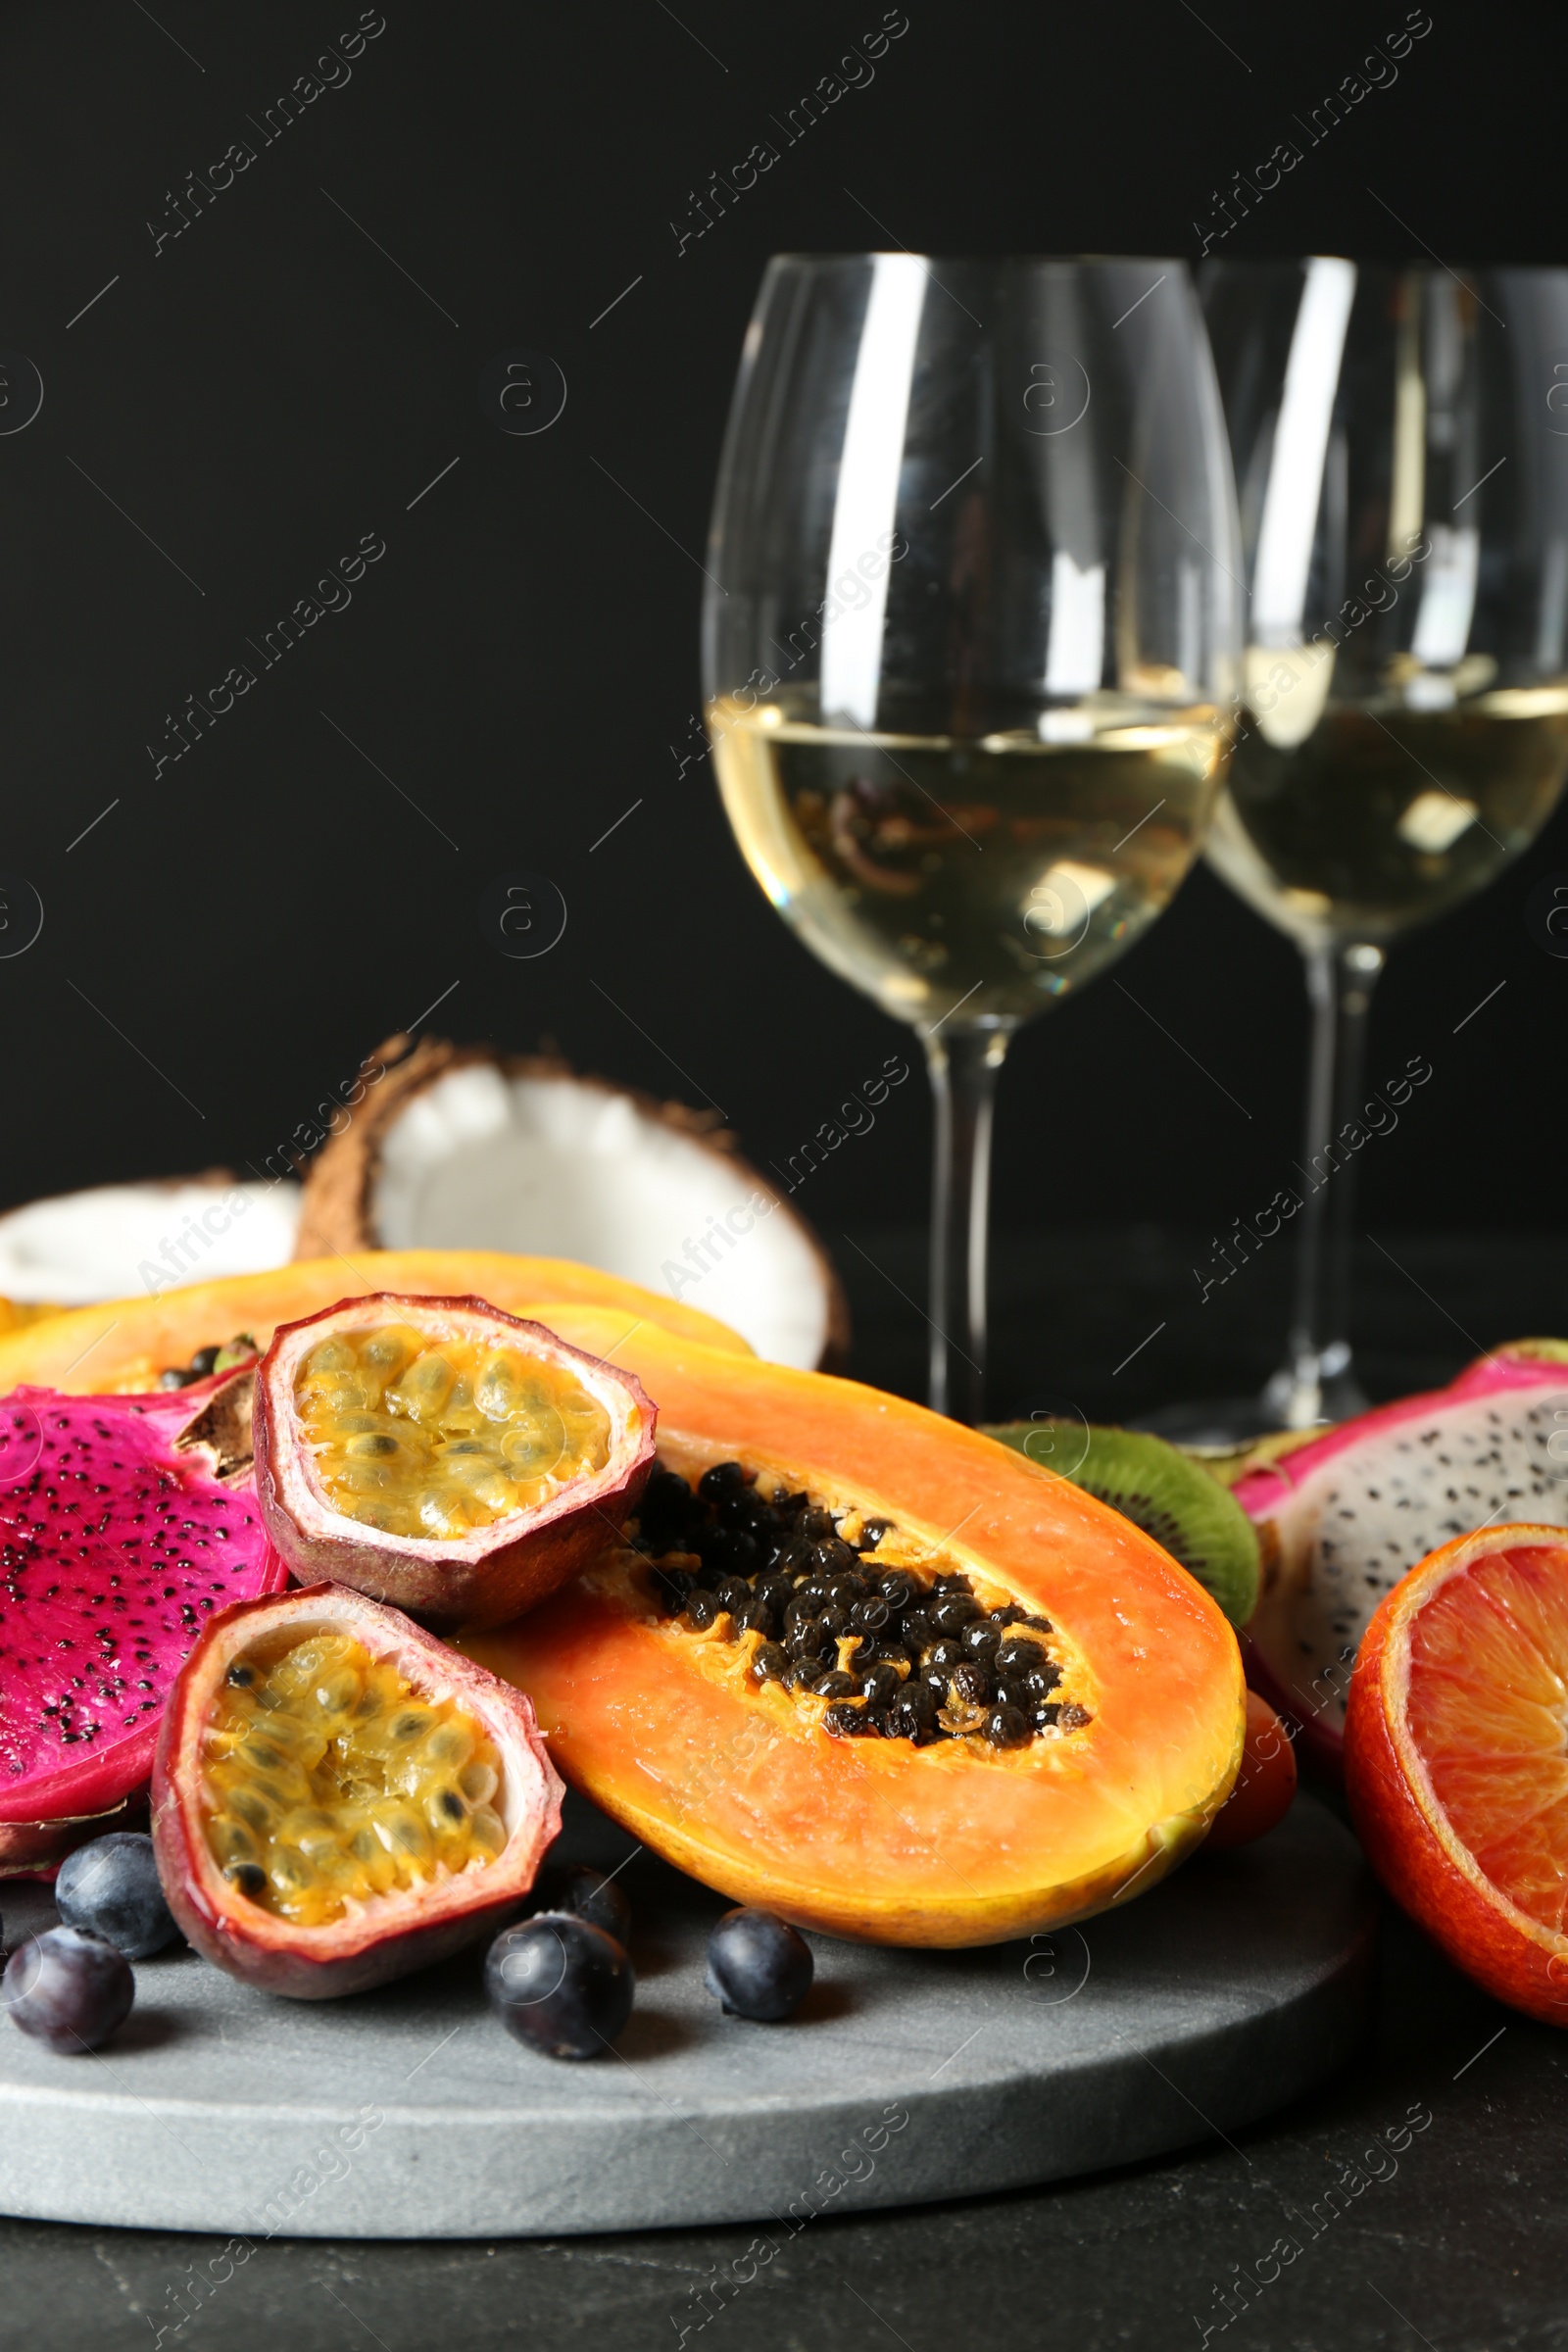 Photo of Delicious exotic fruits and wine on black table